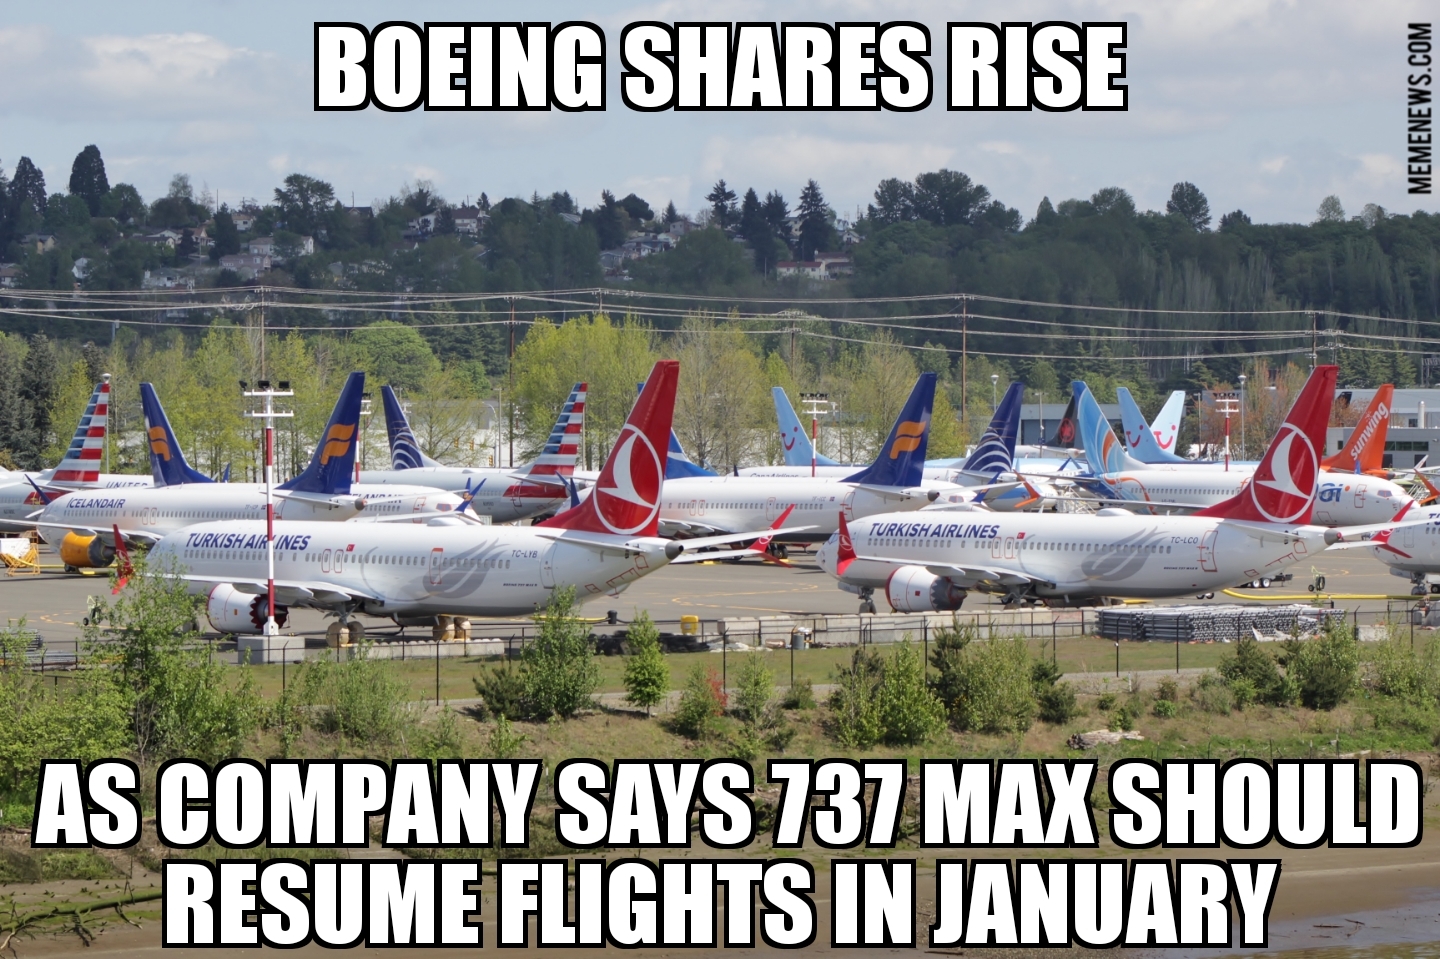 Boeing says 737 Max should resume flights in January